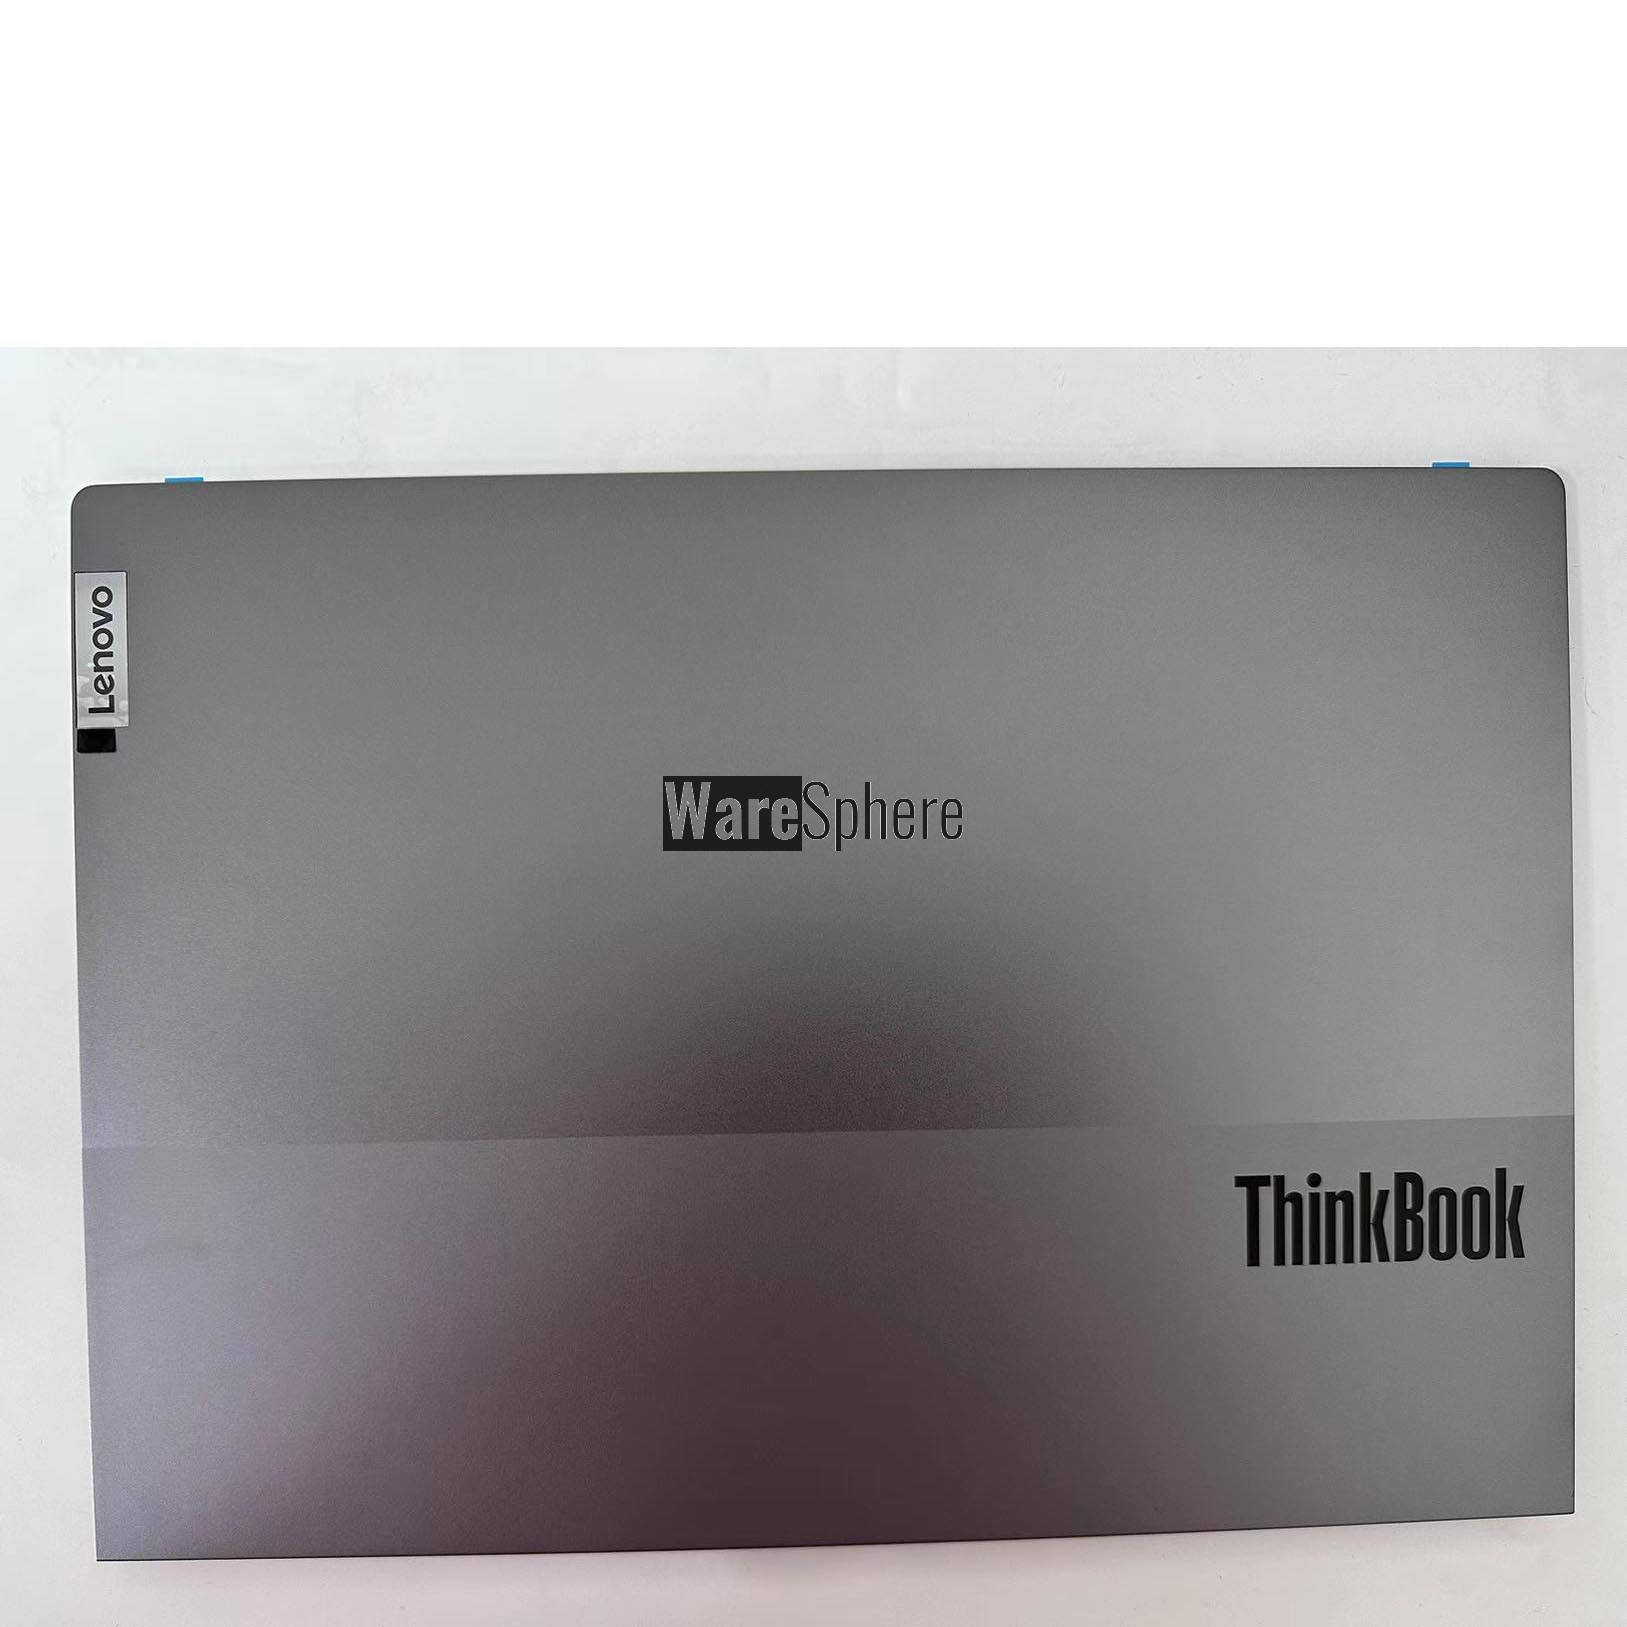 LCD Back Cover for Lenovo ThinkBook 14 G4+ 2022 NB5979 8SSCBOR769760  HQ20706474000 Grey